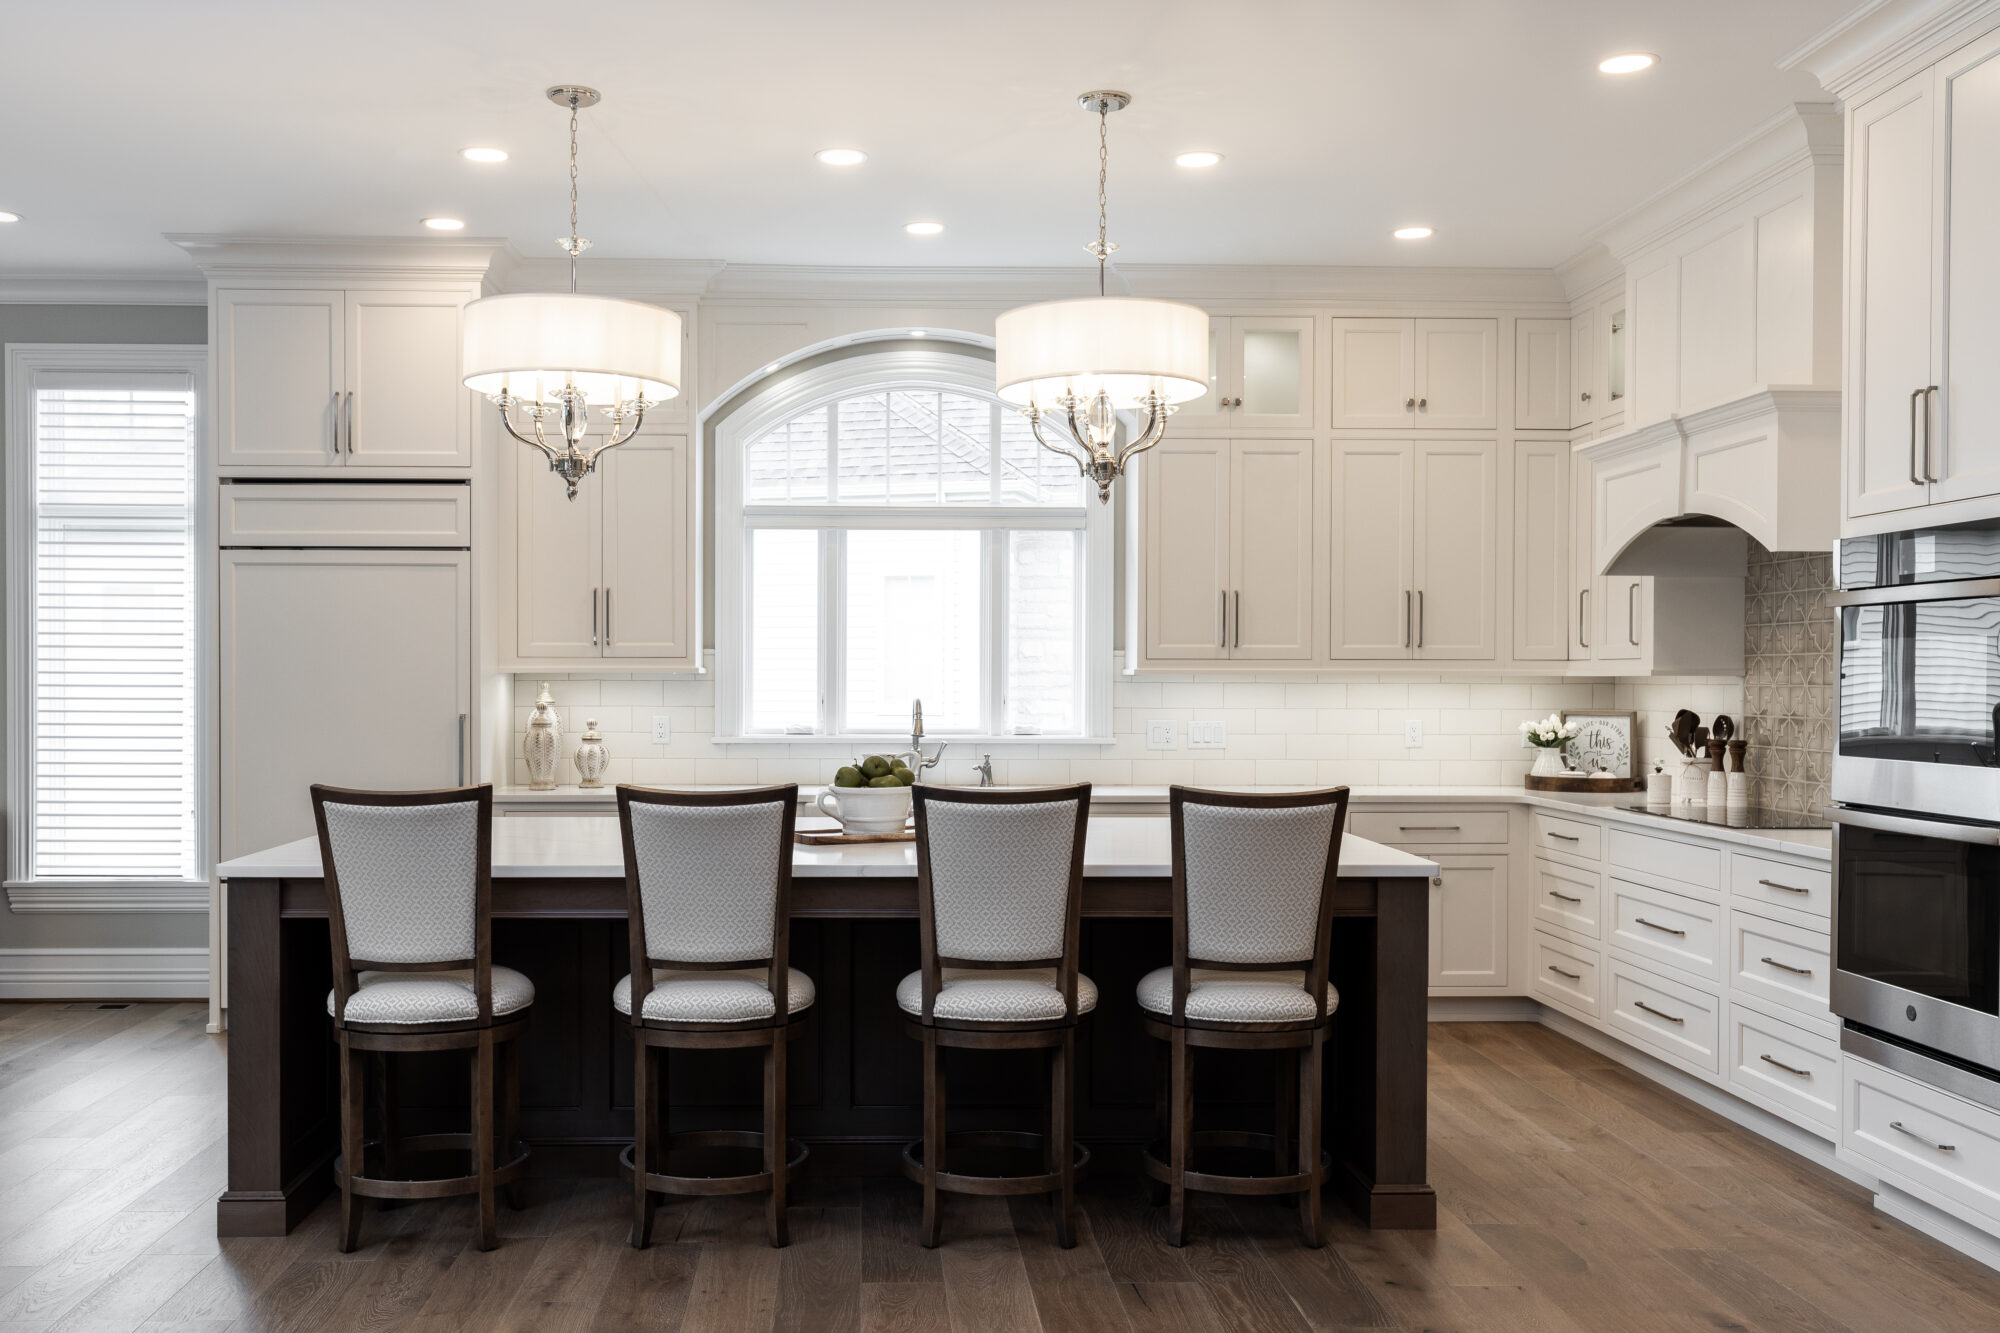 A beautifully renovated kitchen featuring light brown hardwood flooring, white custom cabinetry, and a central island with contrasting dark brown cabinets.